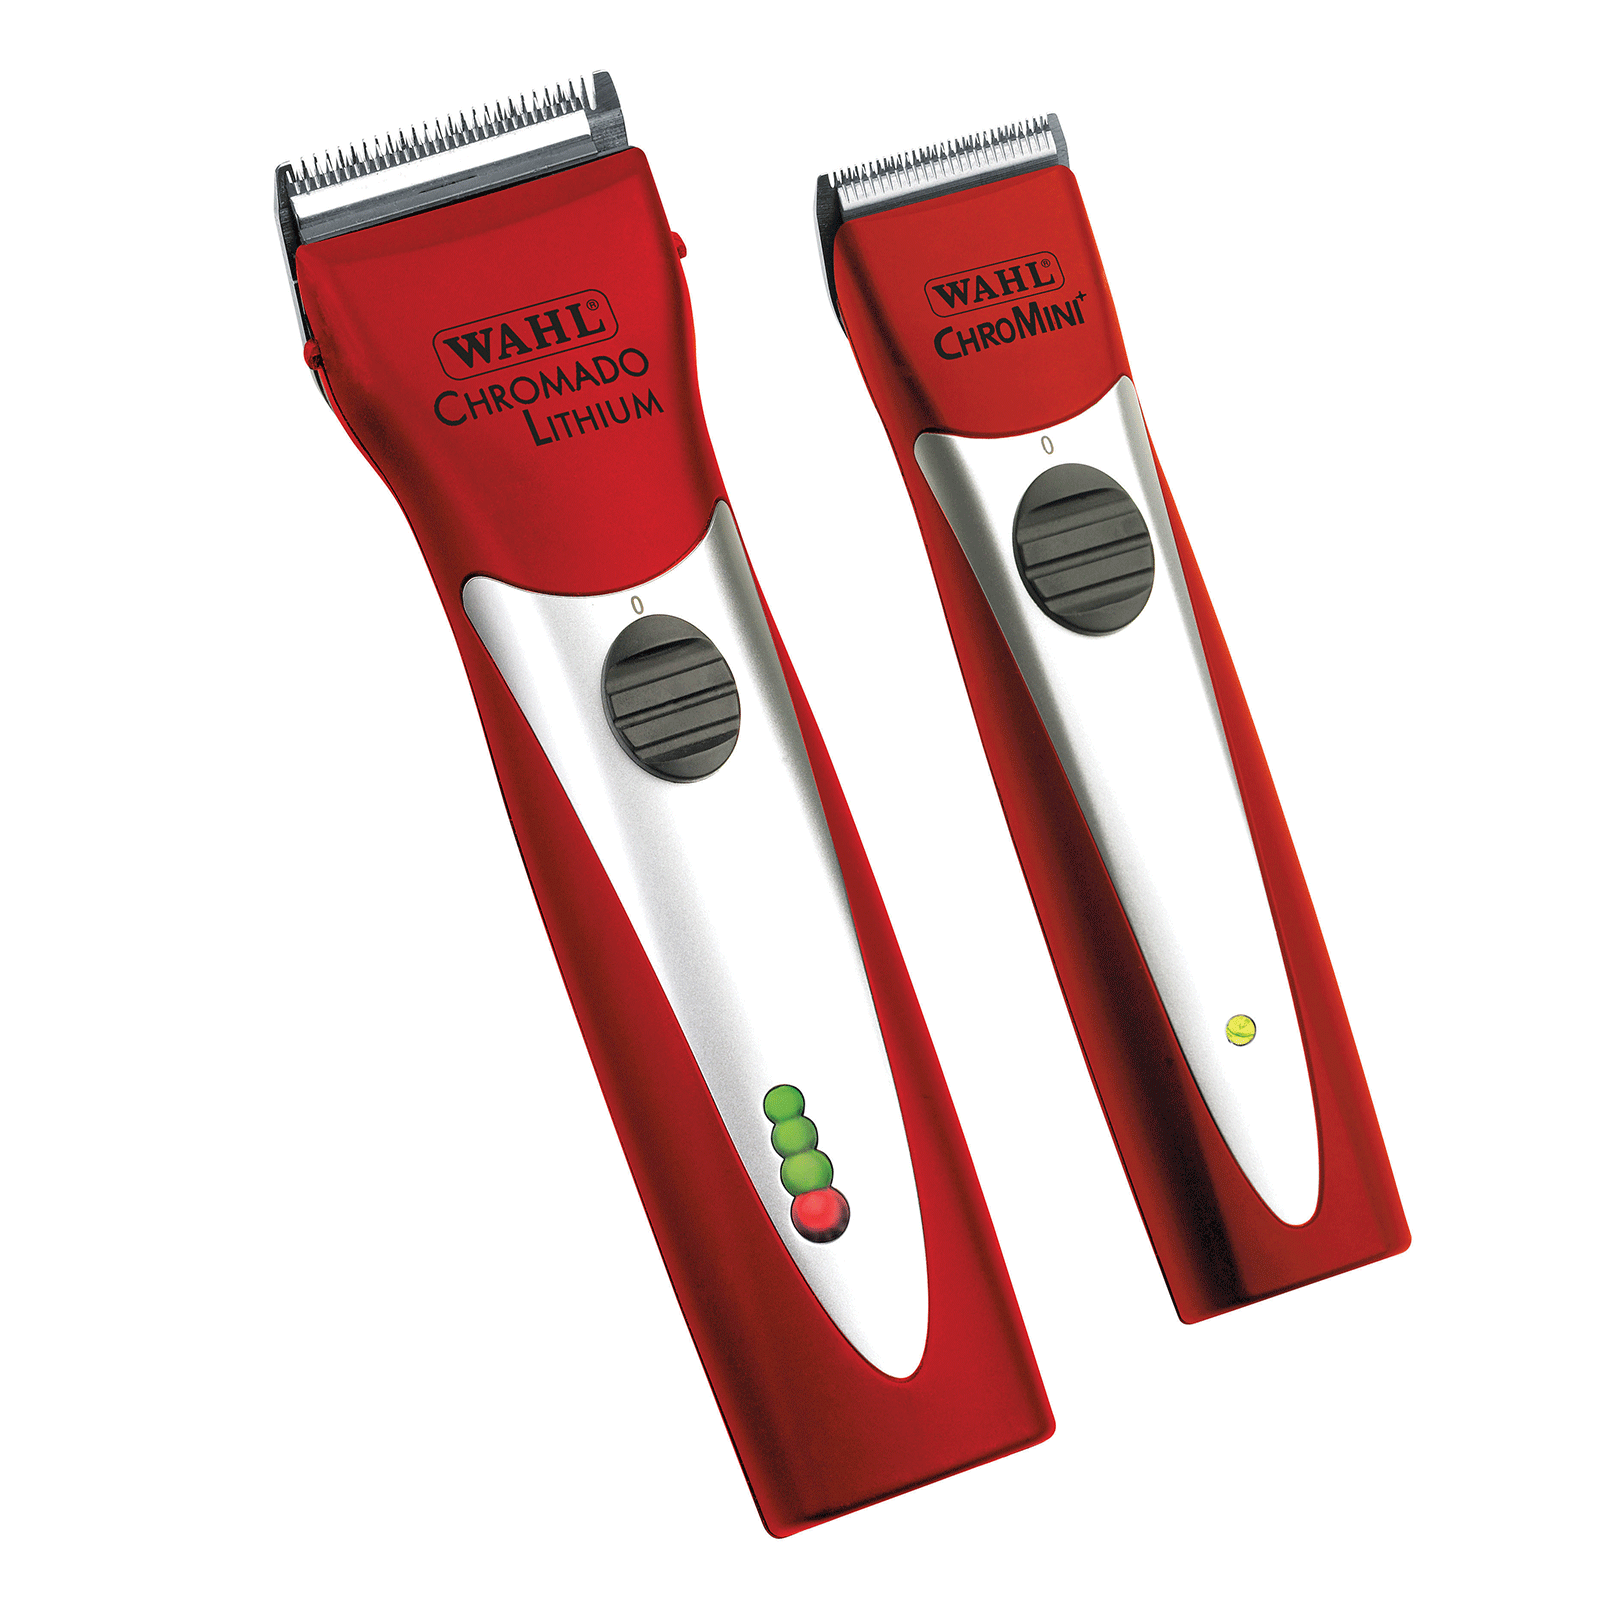 wahl chromini trimmer